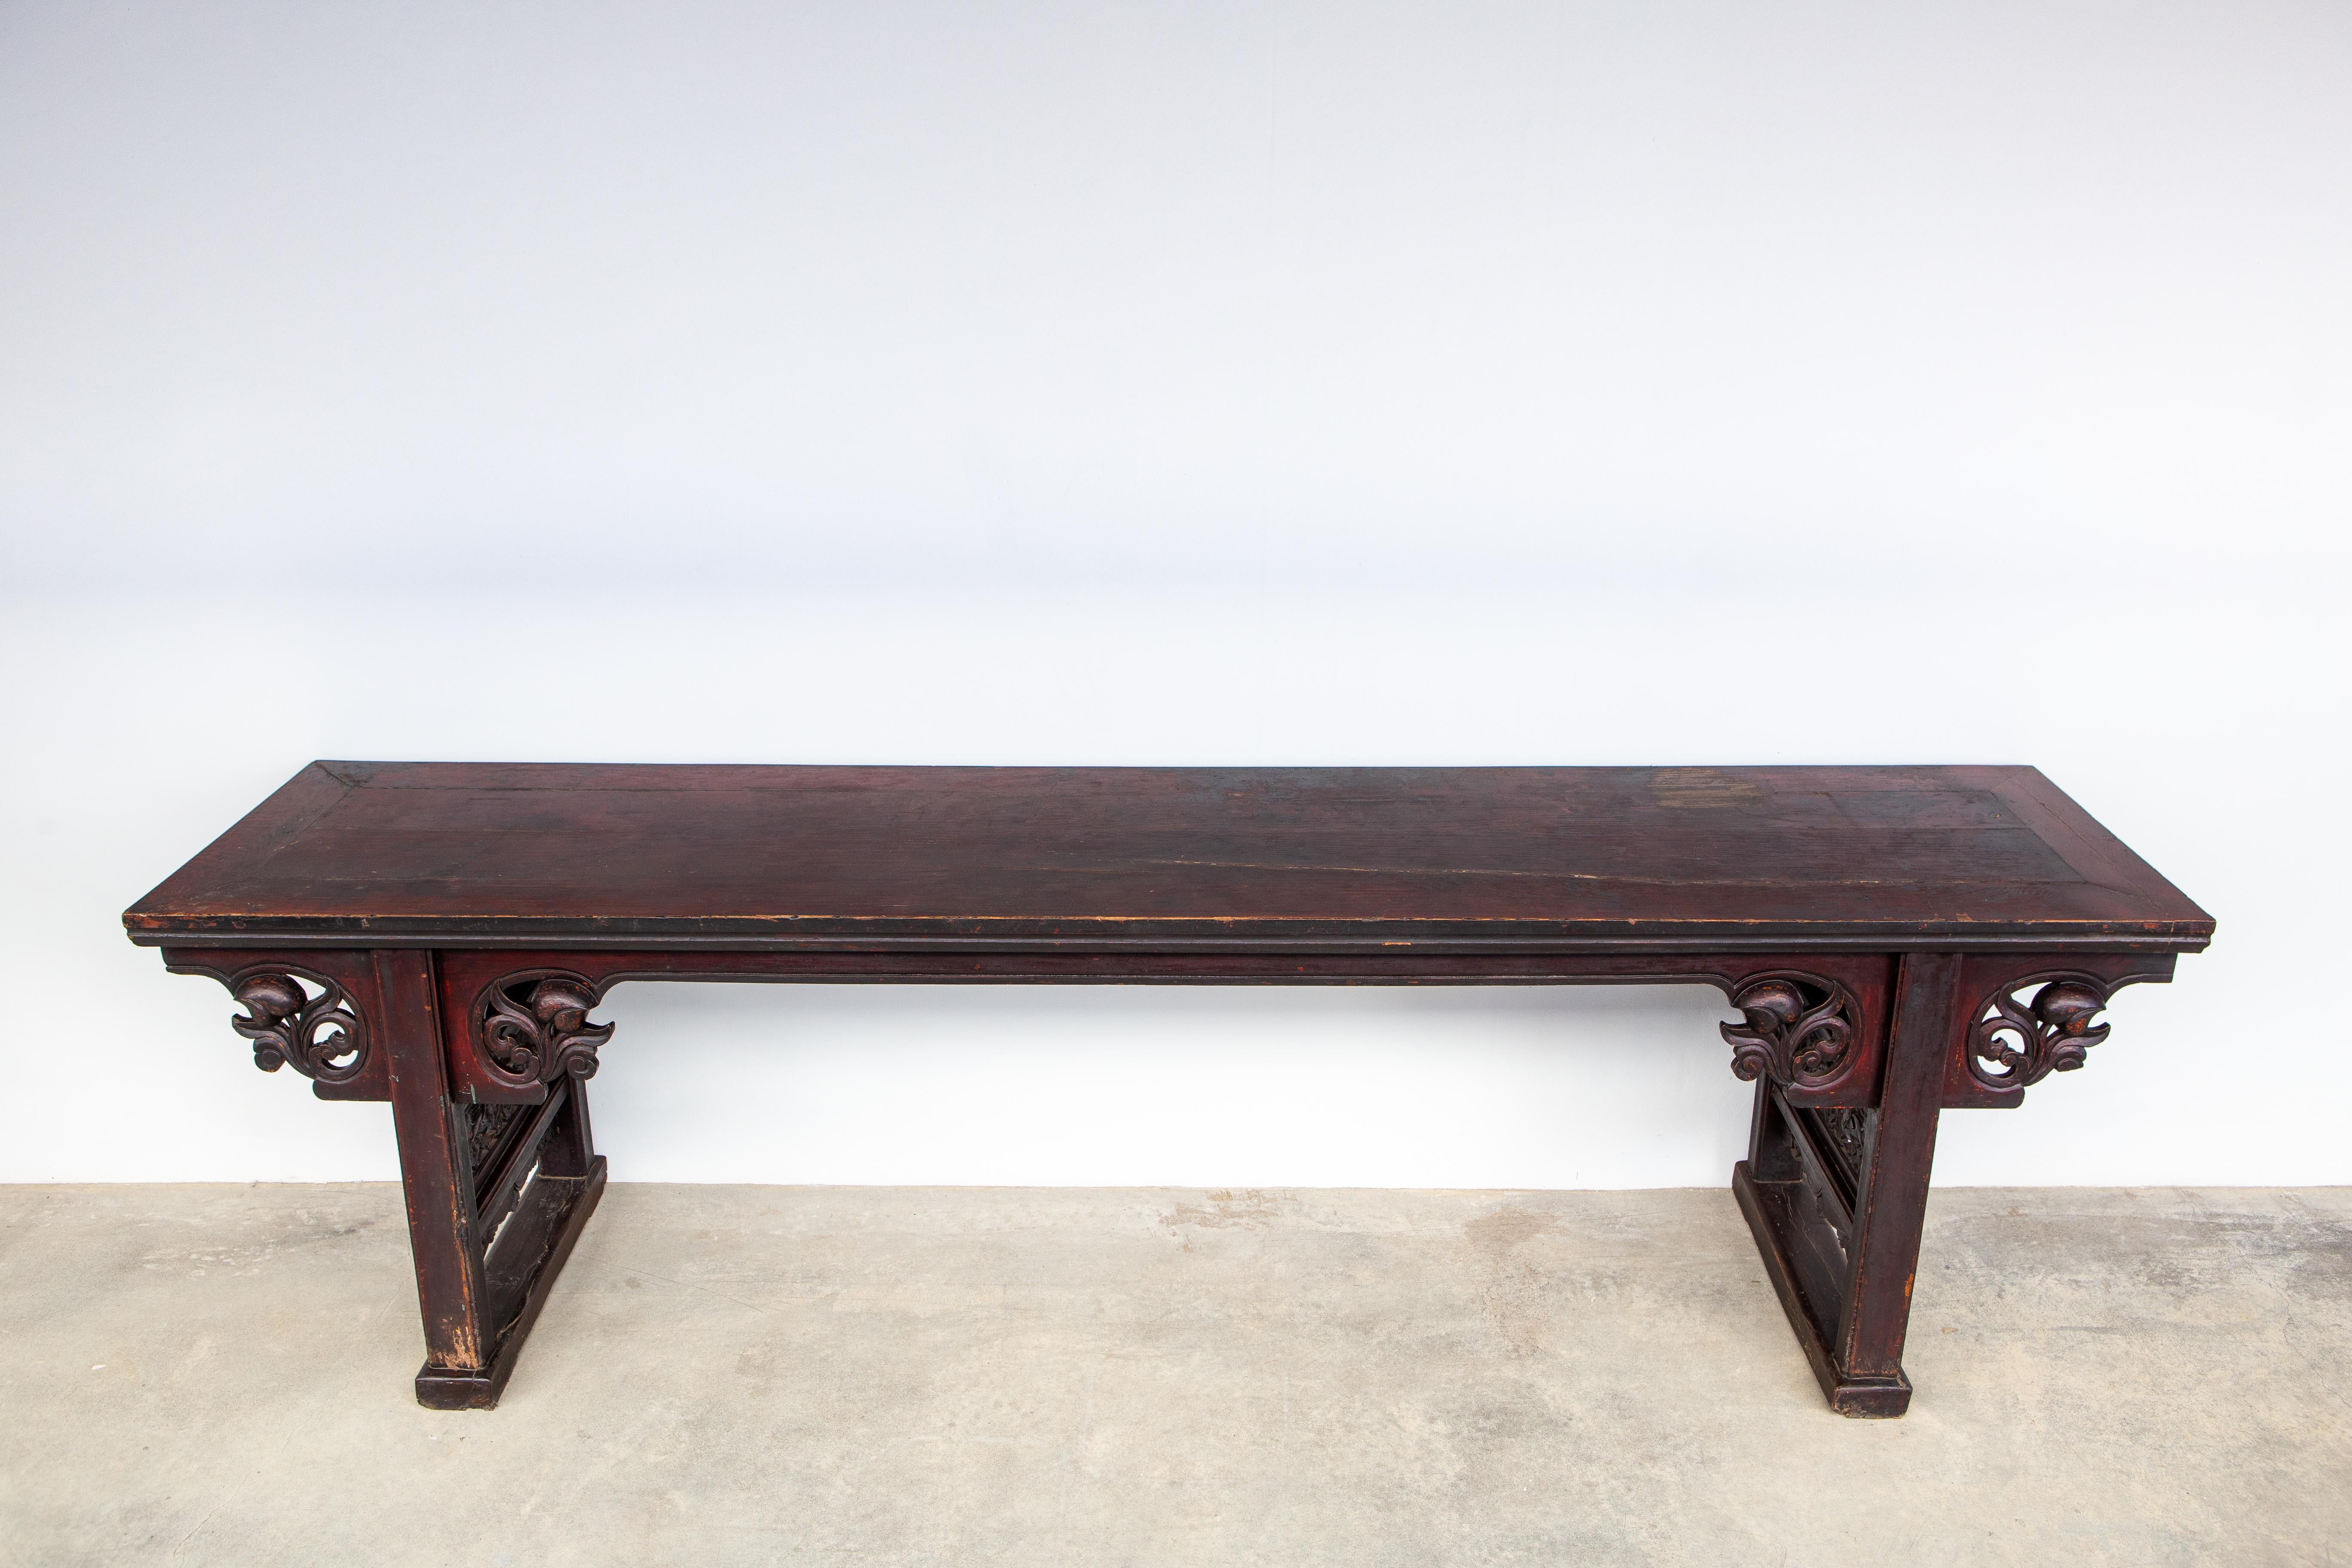 This monumental altar table is from Shanxi Province, China and was made from Elm wood during the mid-Qing dynasty. The piece retains most of its original oxblood lacquer. Oxblood is one of the three traditional Chinese lacquers. Red and black